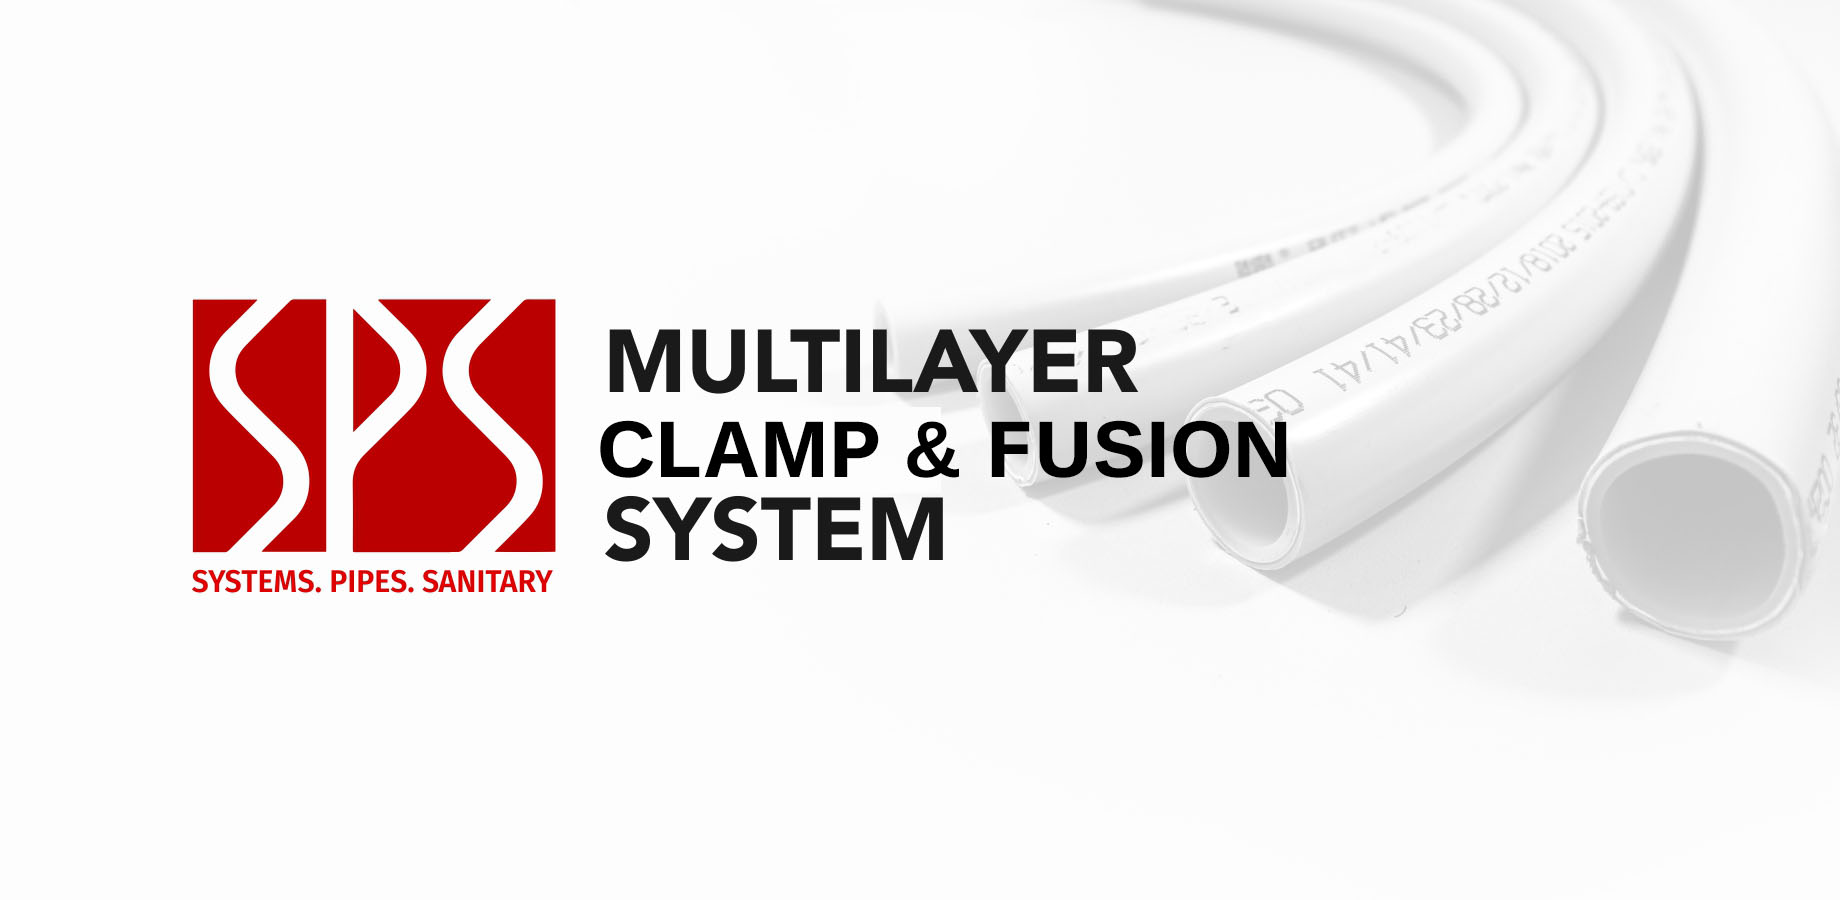 Multilayer clamp & fusion system